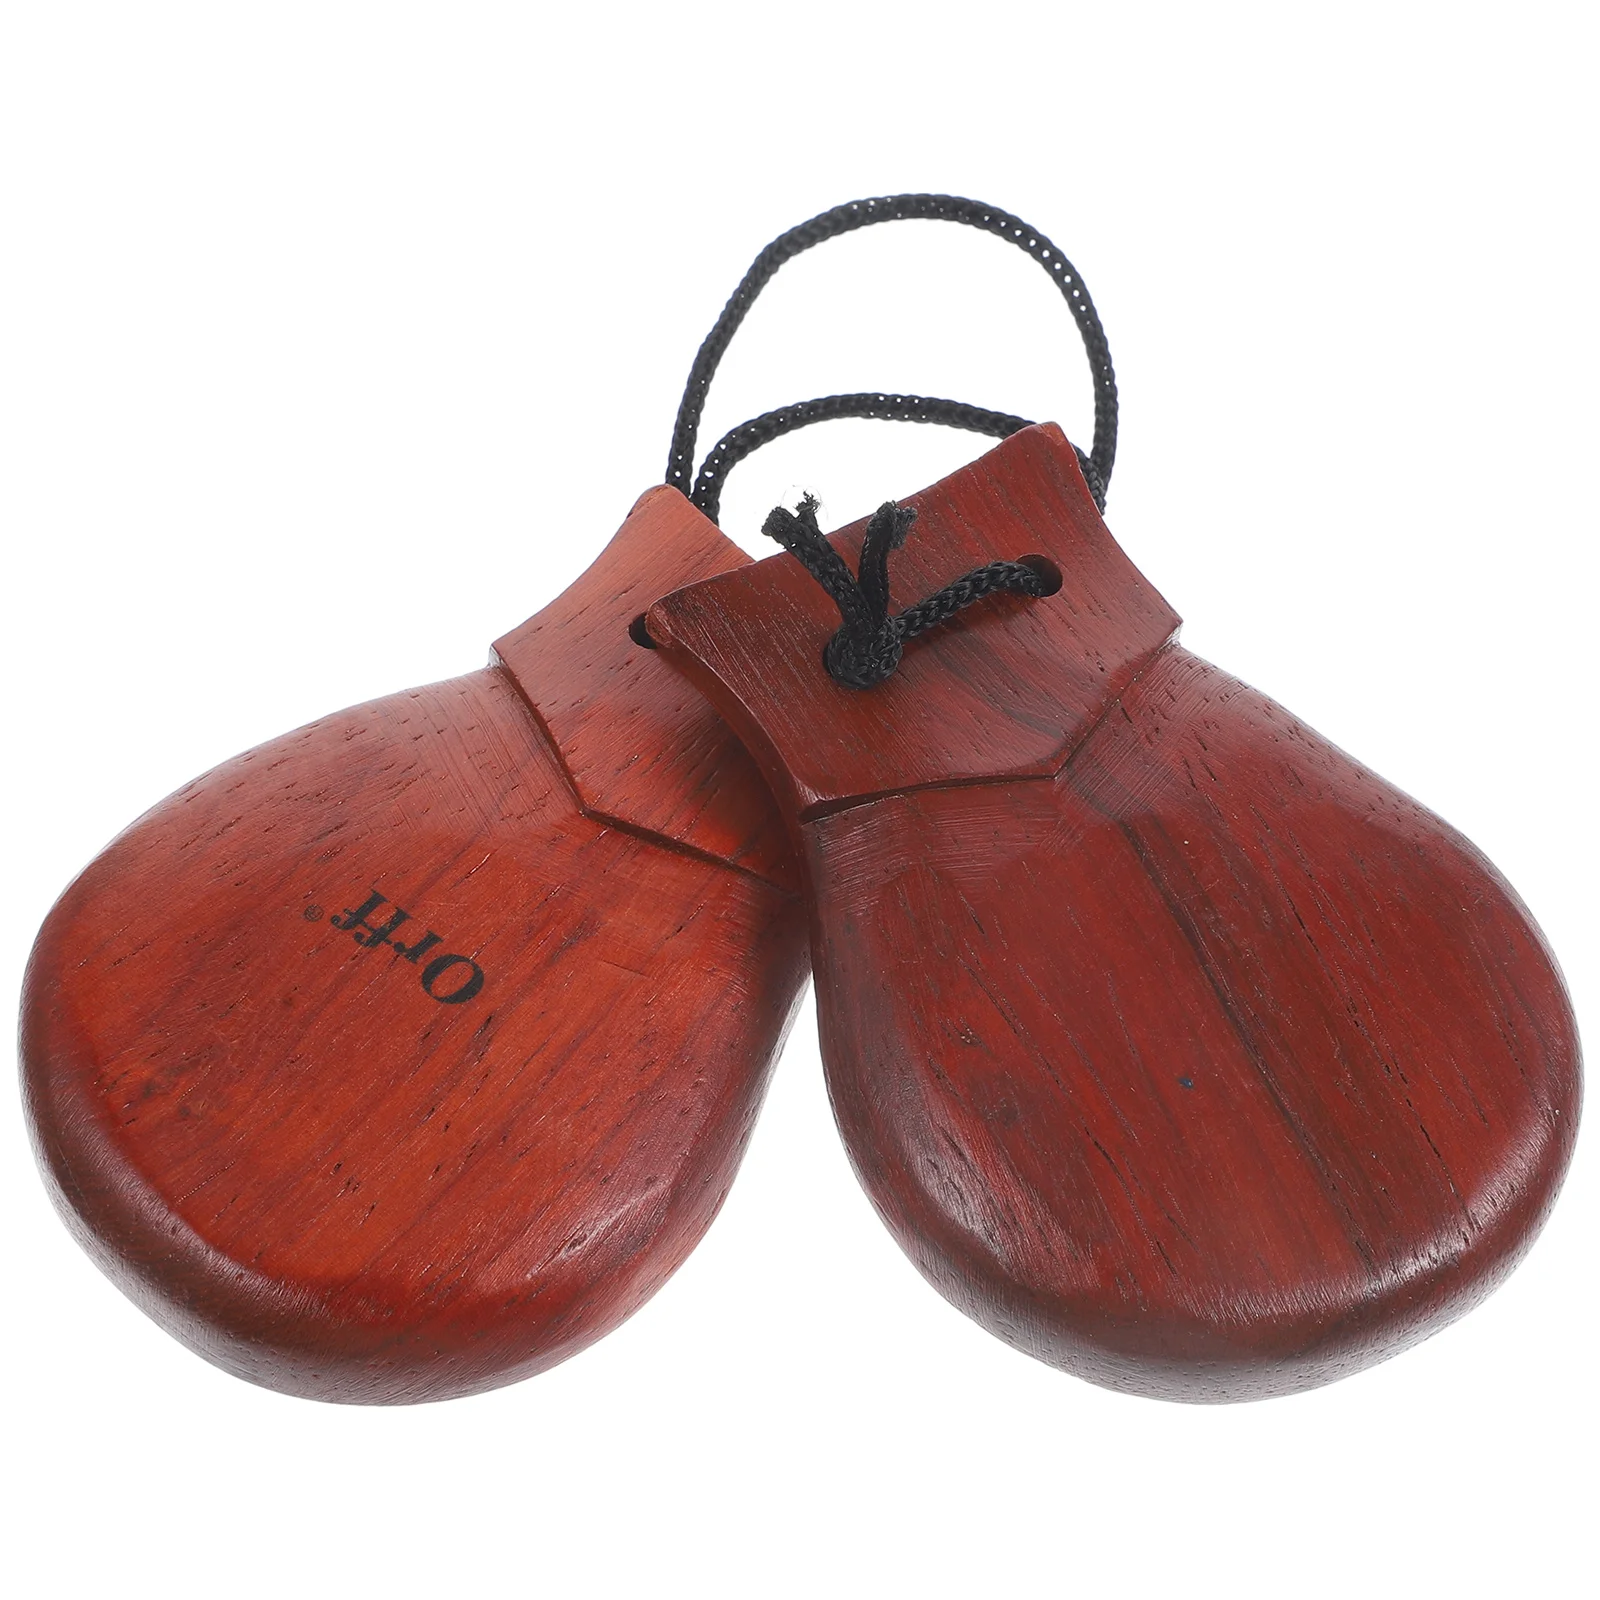 

Castanet Percussion Instrument Spanish Castanet Wooden Percussion Castanet for Adults Percussion Instruments Kids Education Toys